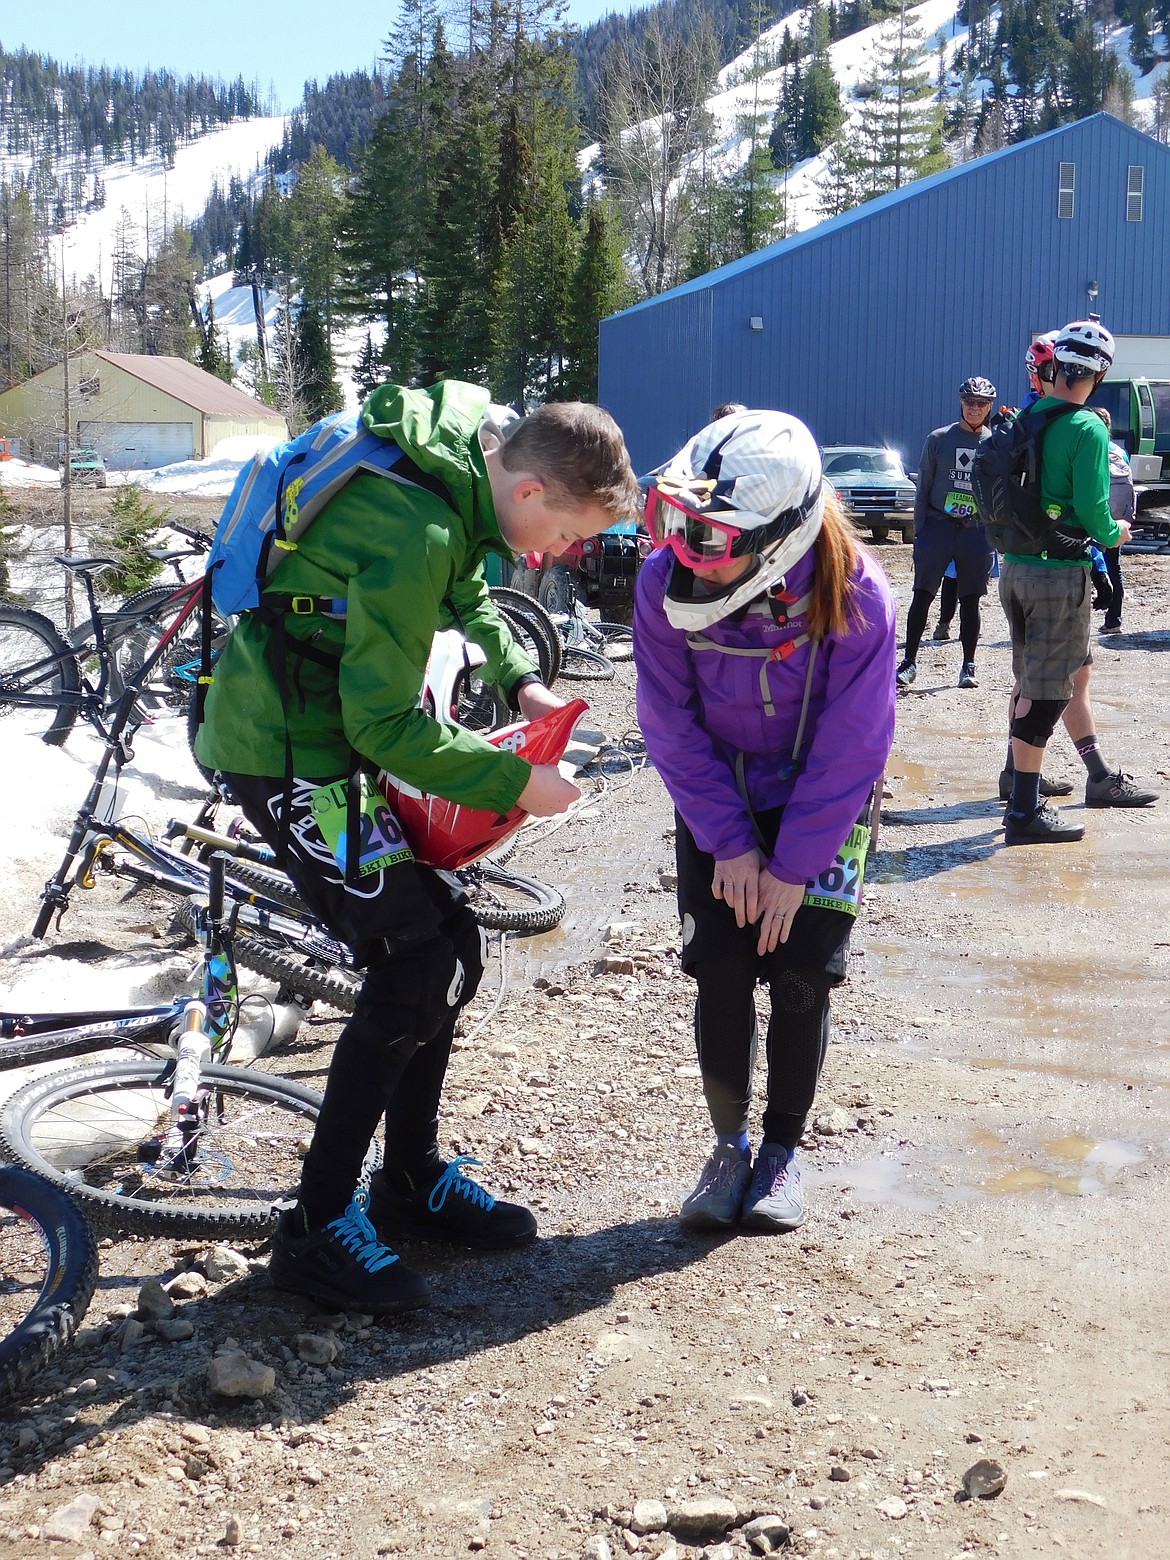 A mother&#146;s work is never done. Stacy Goranson looks on as her son and fellow competitor, gets his helmet ready before the bike leg of Leadman.&#160;